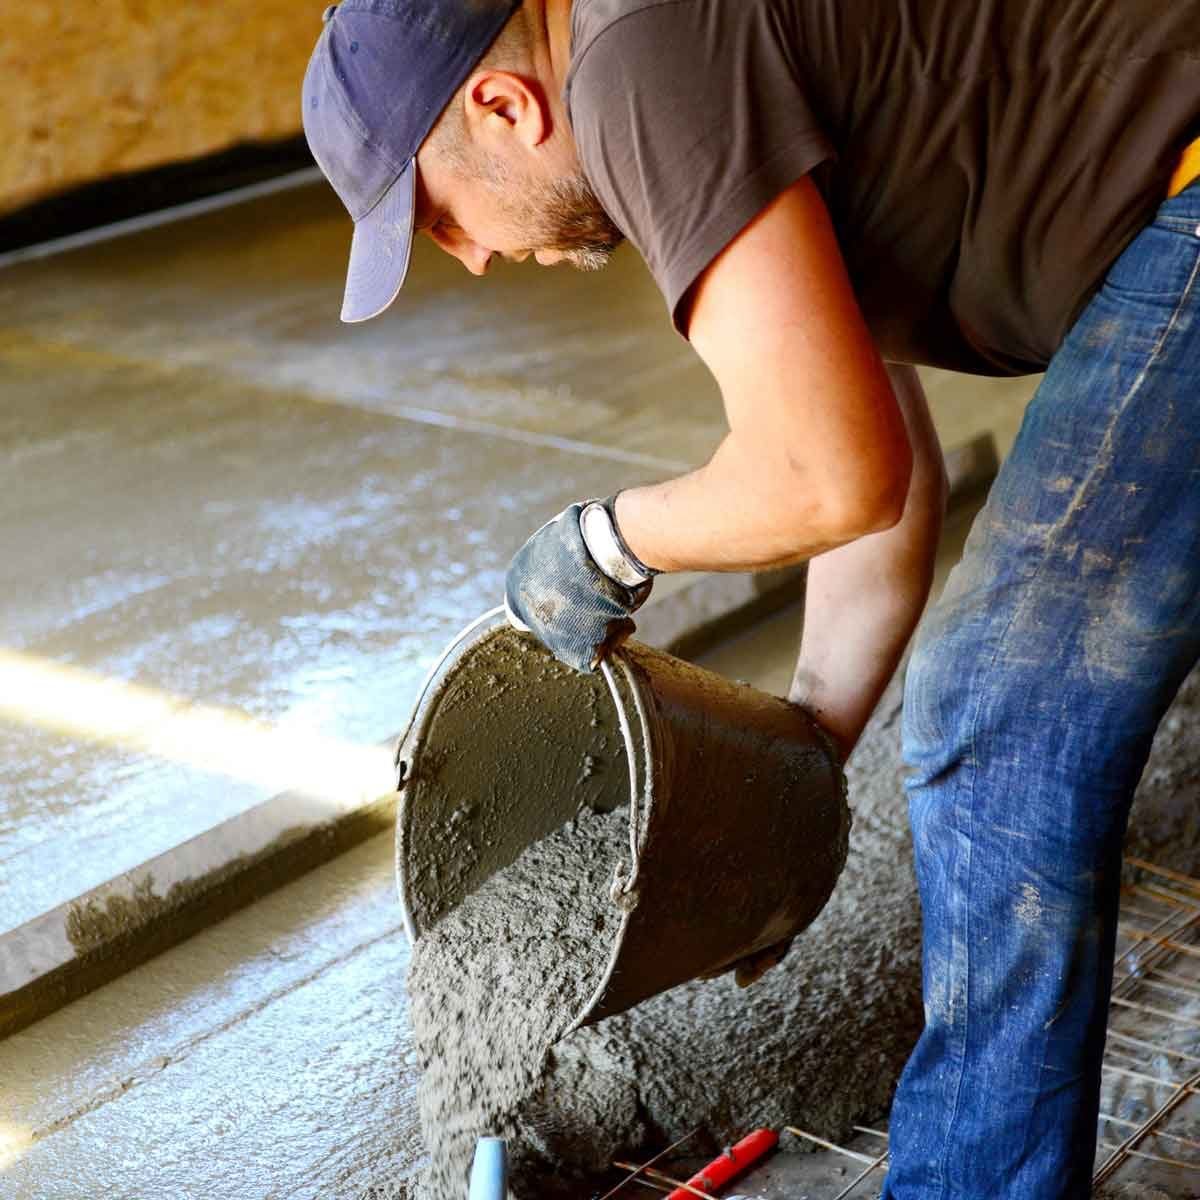 12 Most Common Mistakes When Pouring Concrete